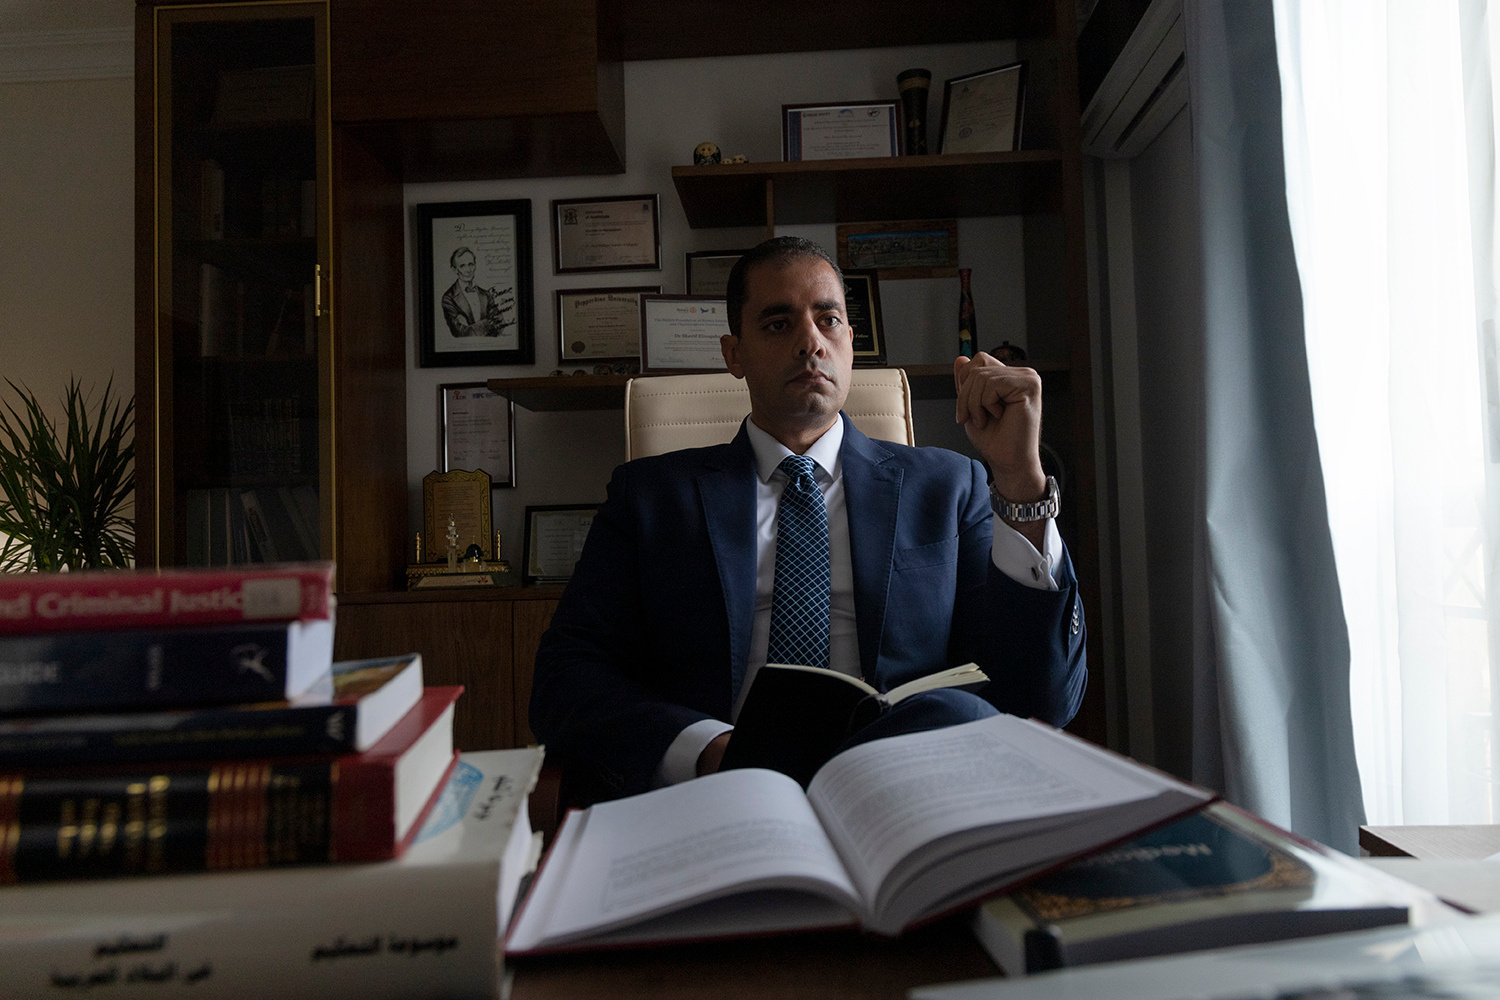 Sherif Elhegahy in a suit sitting at a desk with books.